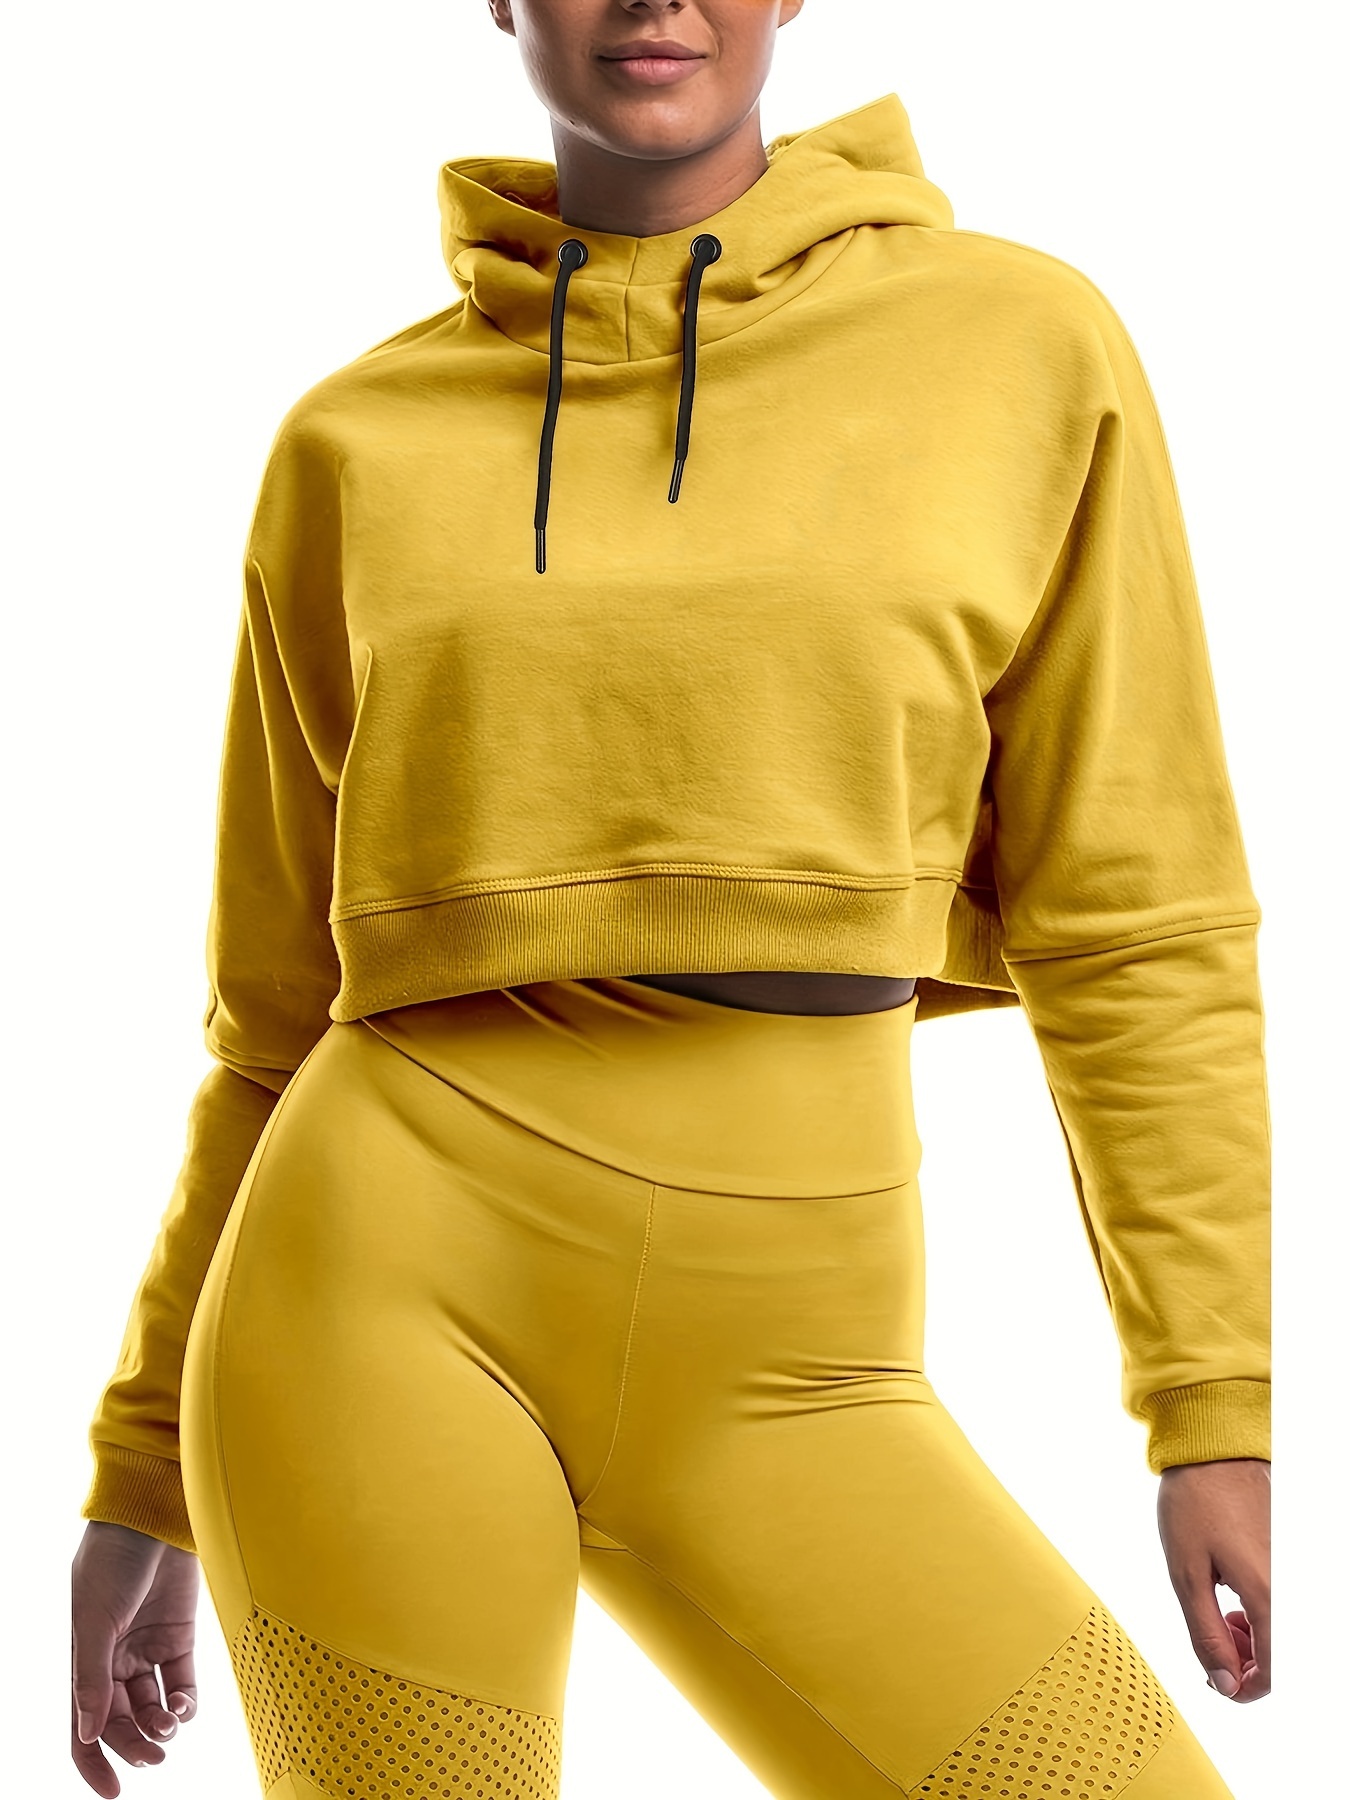 JWZUY Womens Thumb Hole Long Sleeve Fleece Quarter Zip Pullover Sweatshirts  Half Zip Cropped Hoodies Fall Outfits Clothes Yellow S 